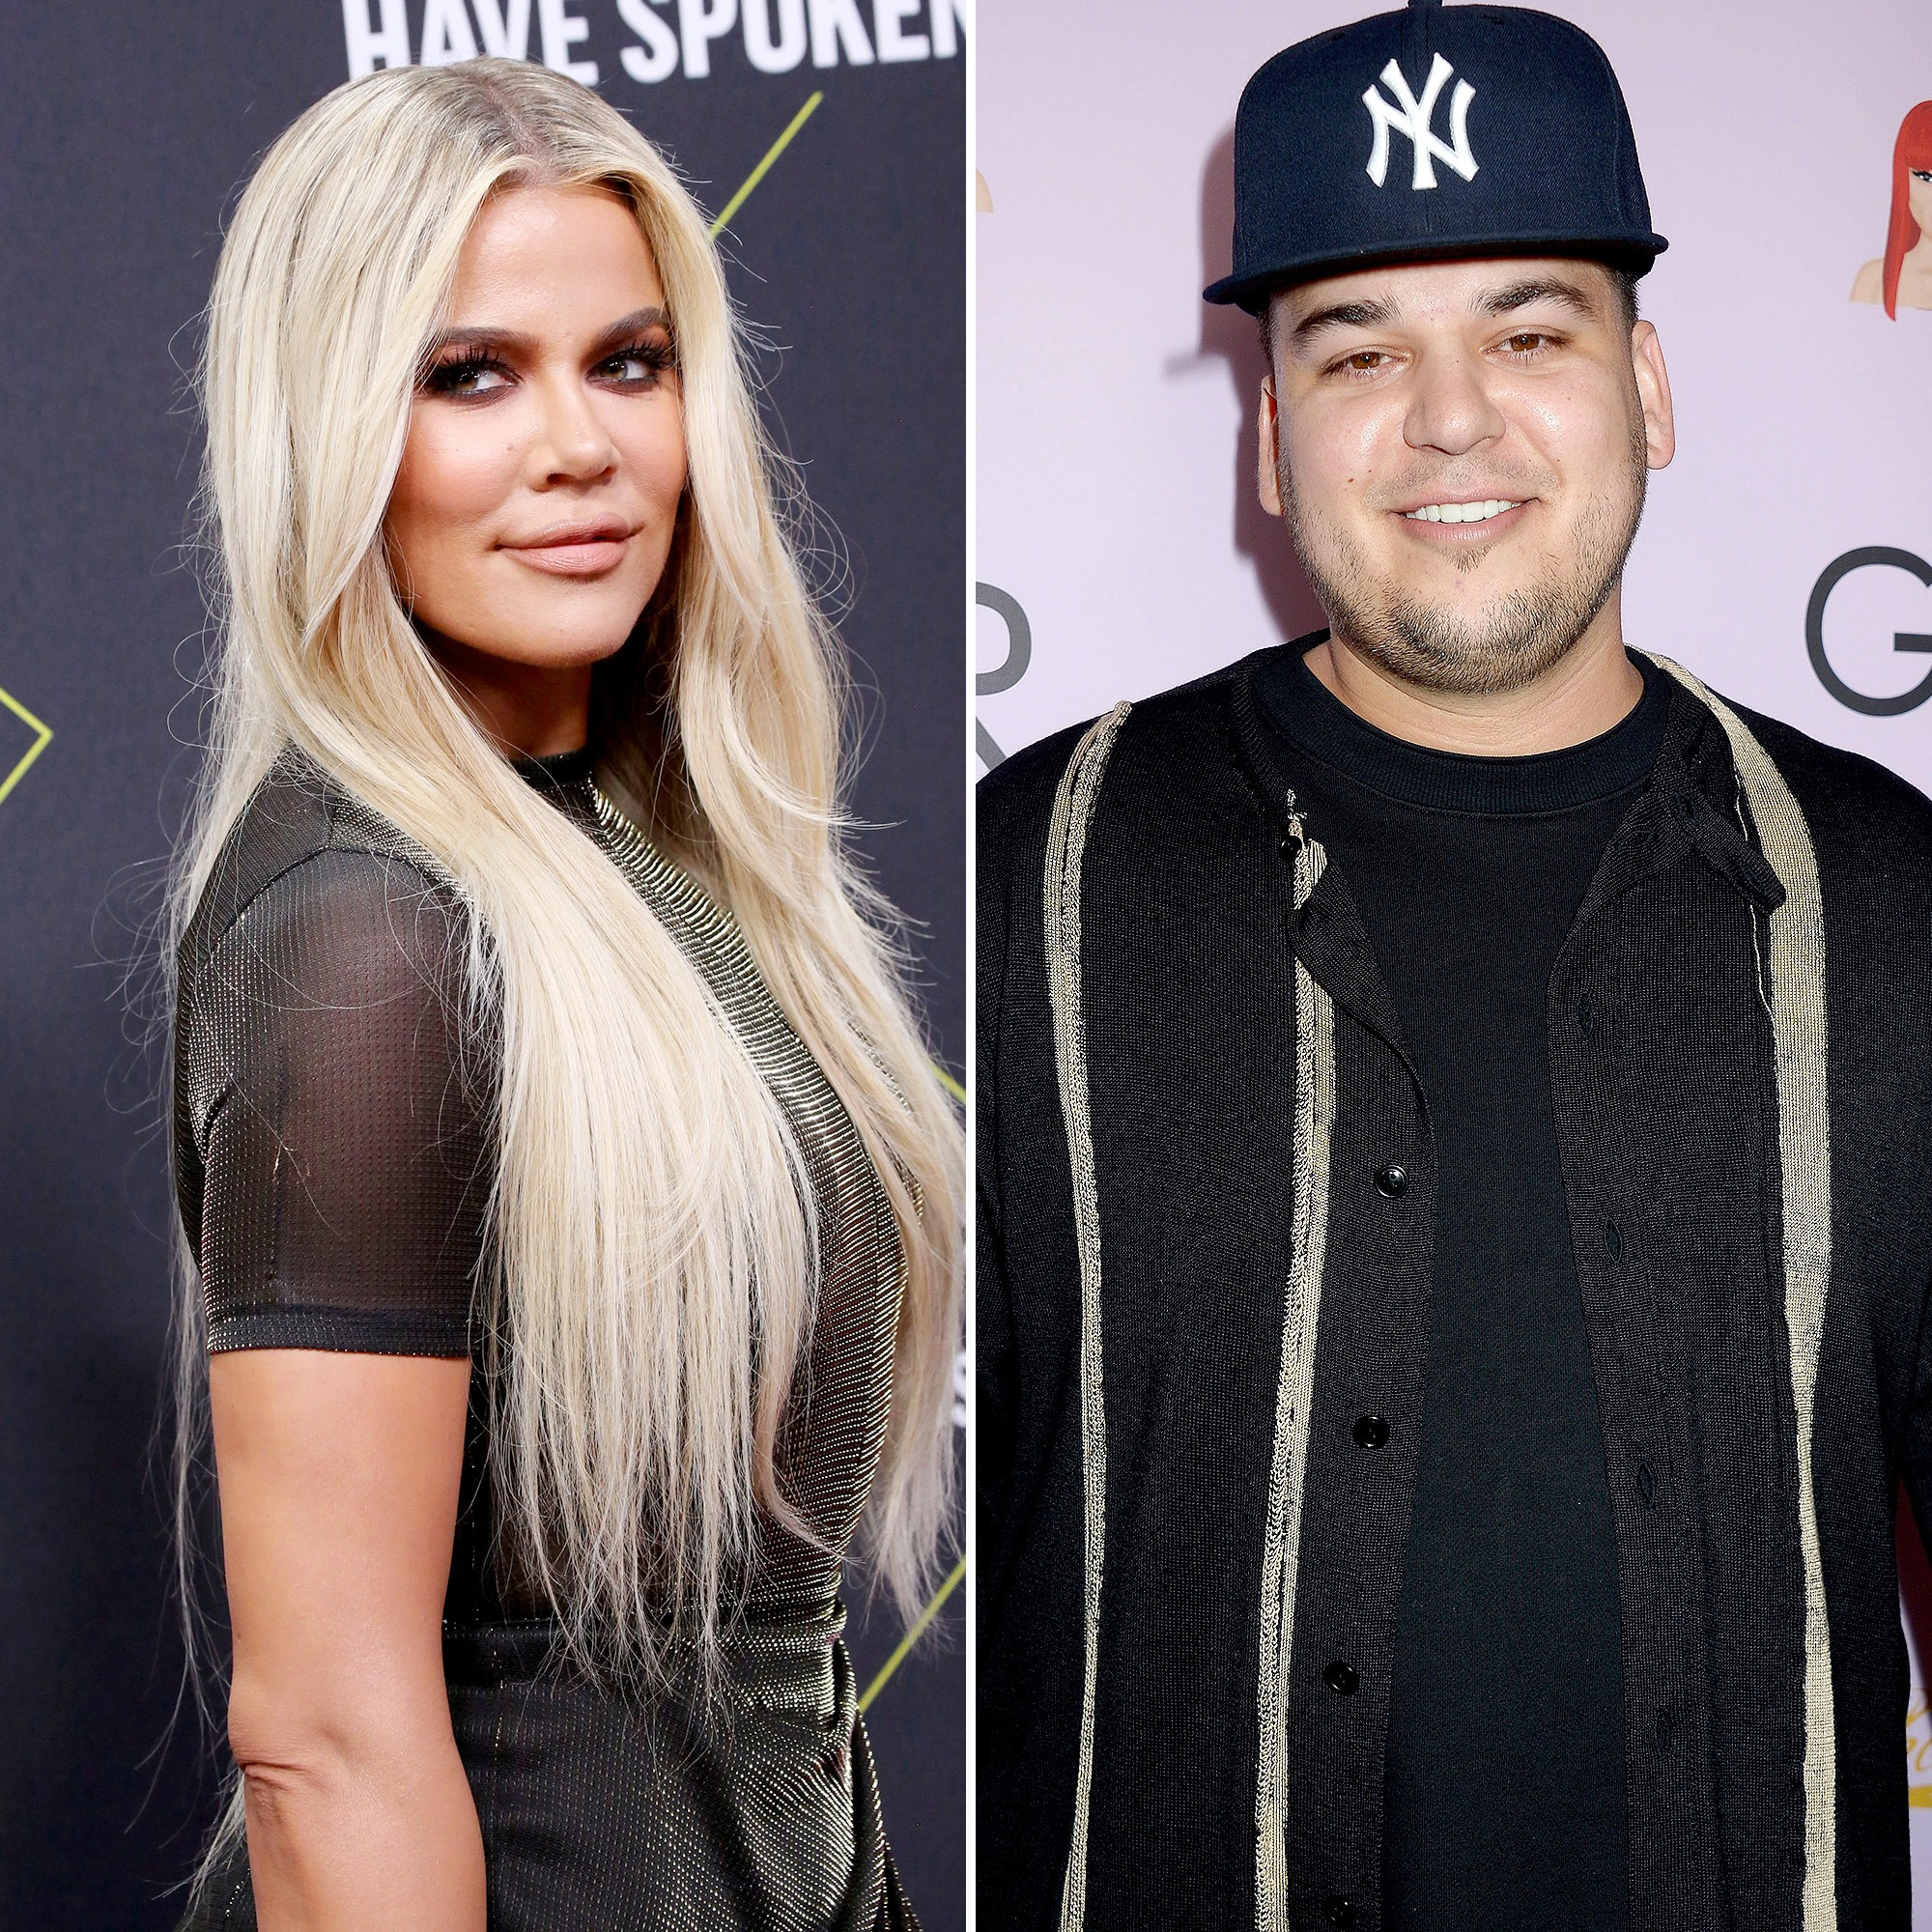 Rob Kardashian on becoming a dad: 'Can't wait' 